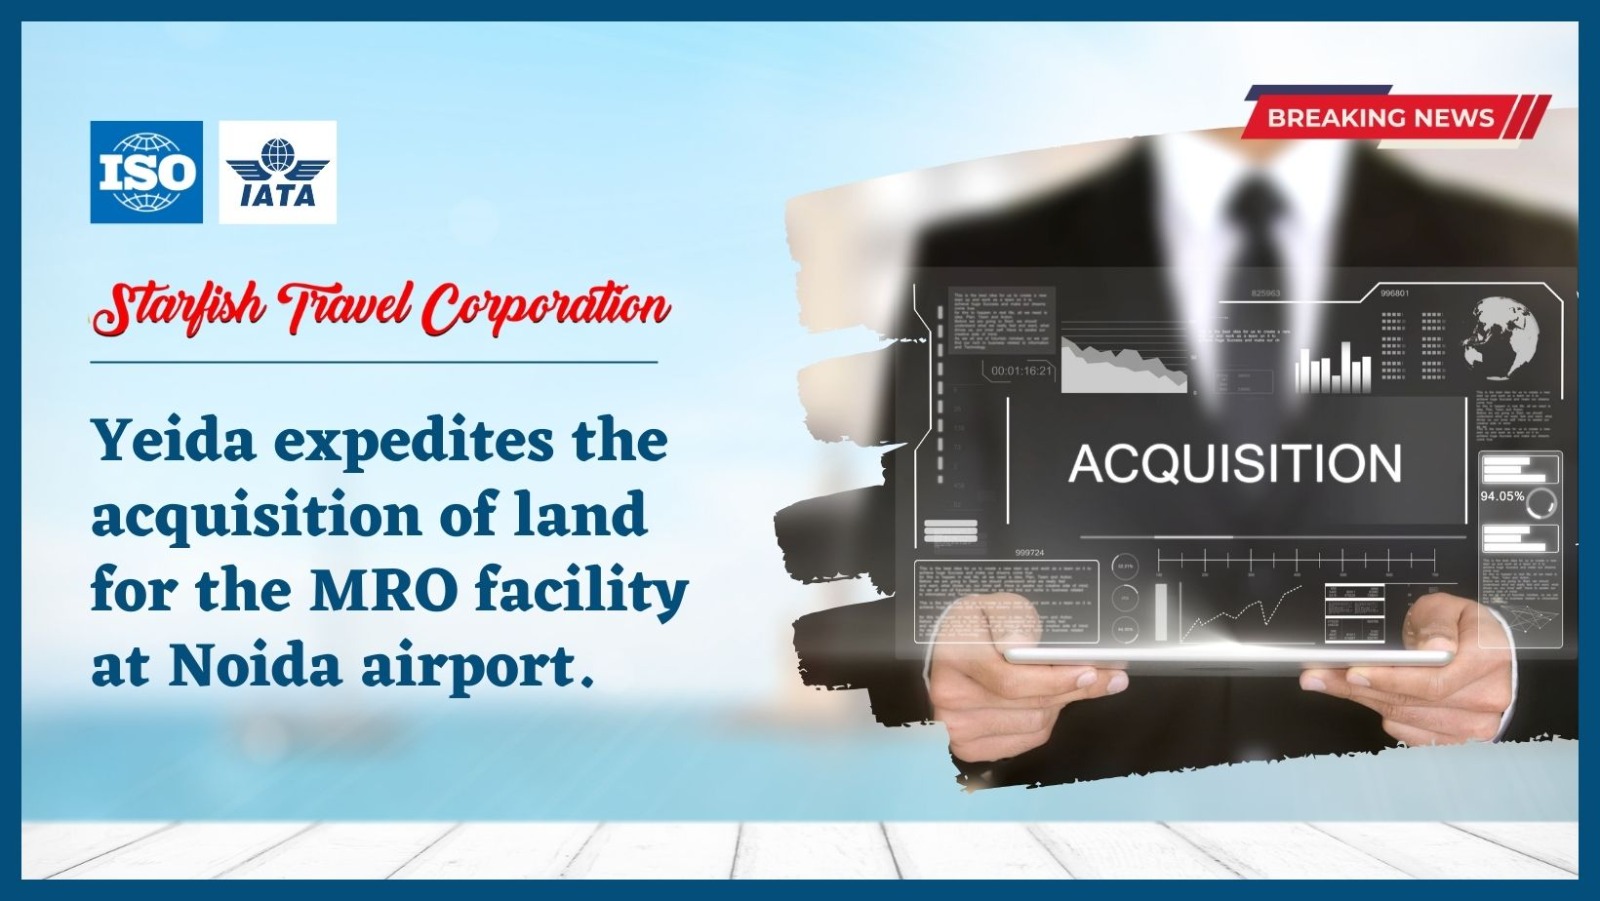 Yeida expedites the acquisition of land for the MRO facility at Noida airport.